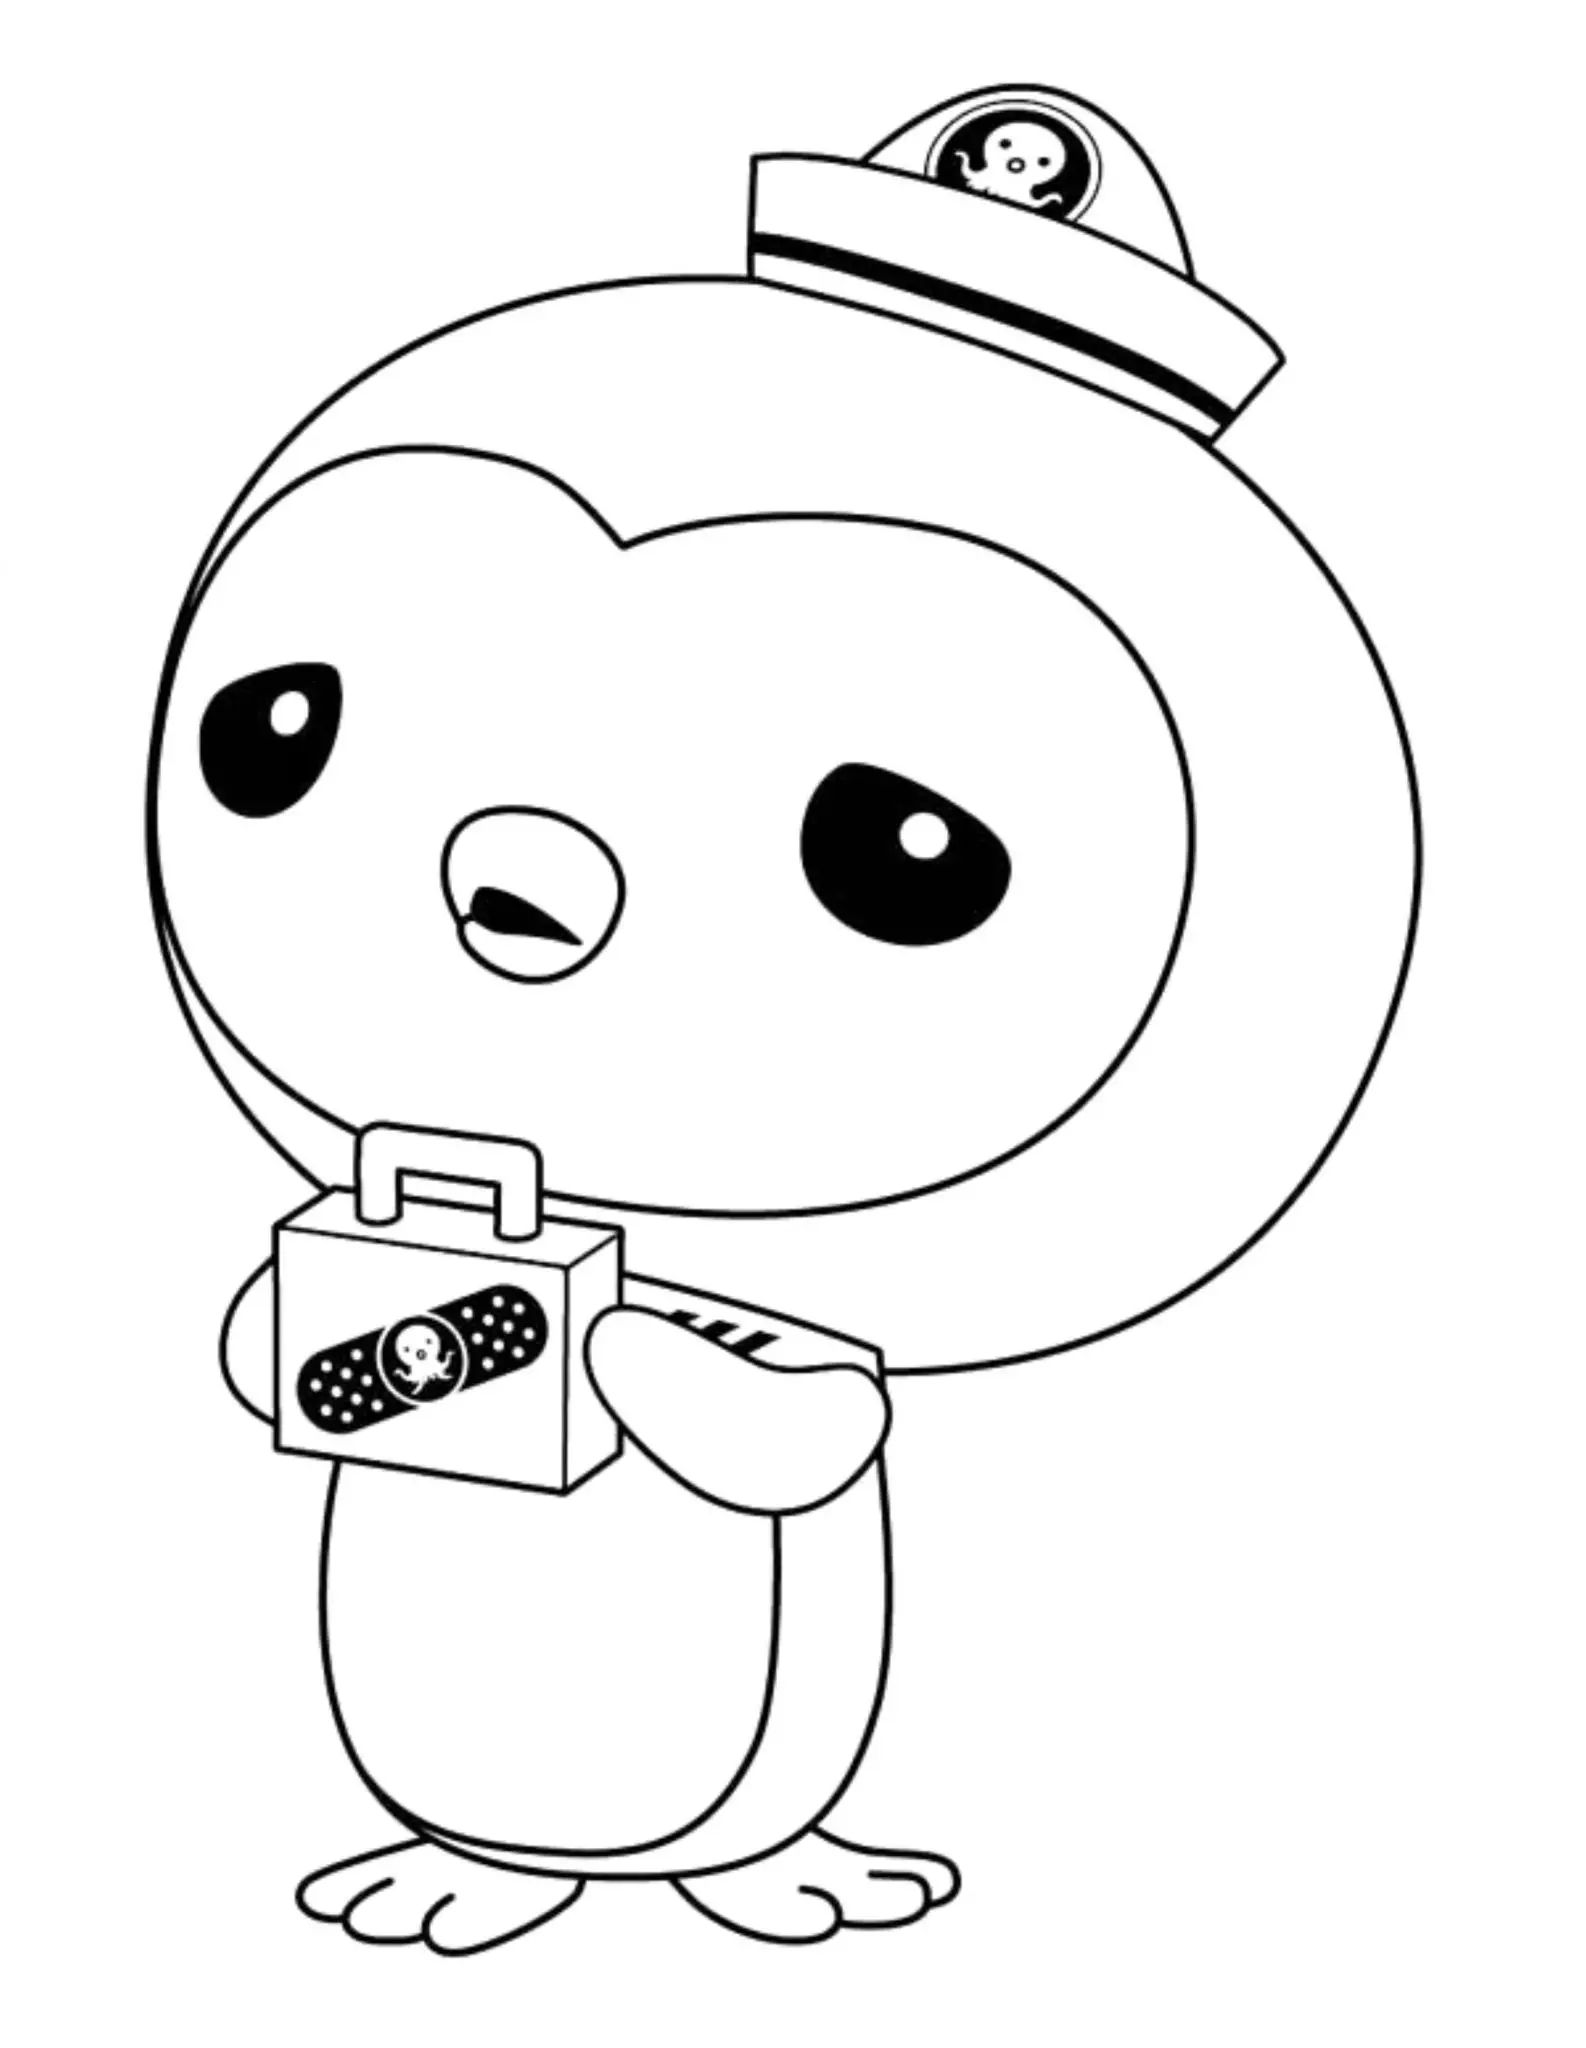 Printable Octonauts Coloring Pages Pdf - Free Printable Octonauts Coloring Pages